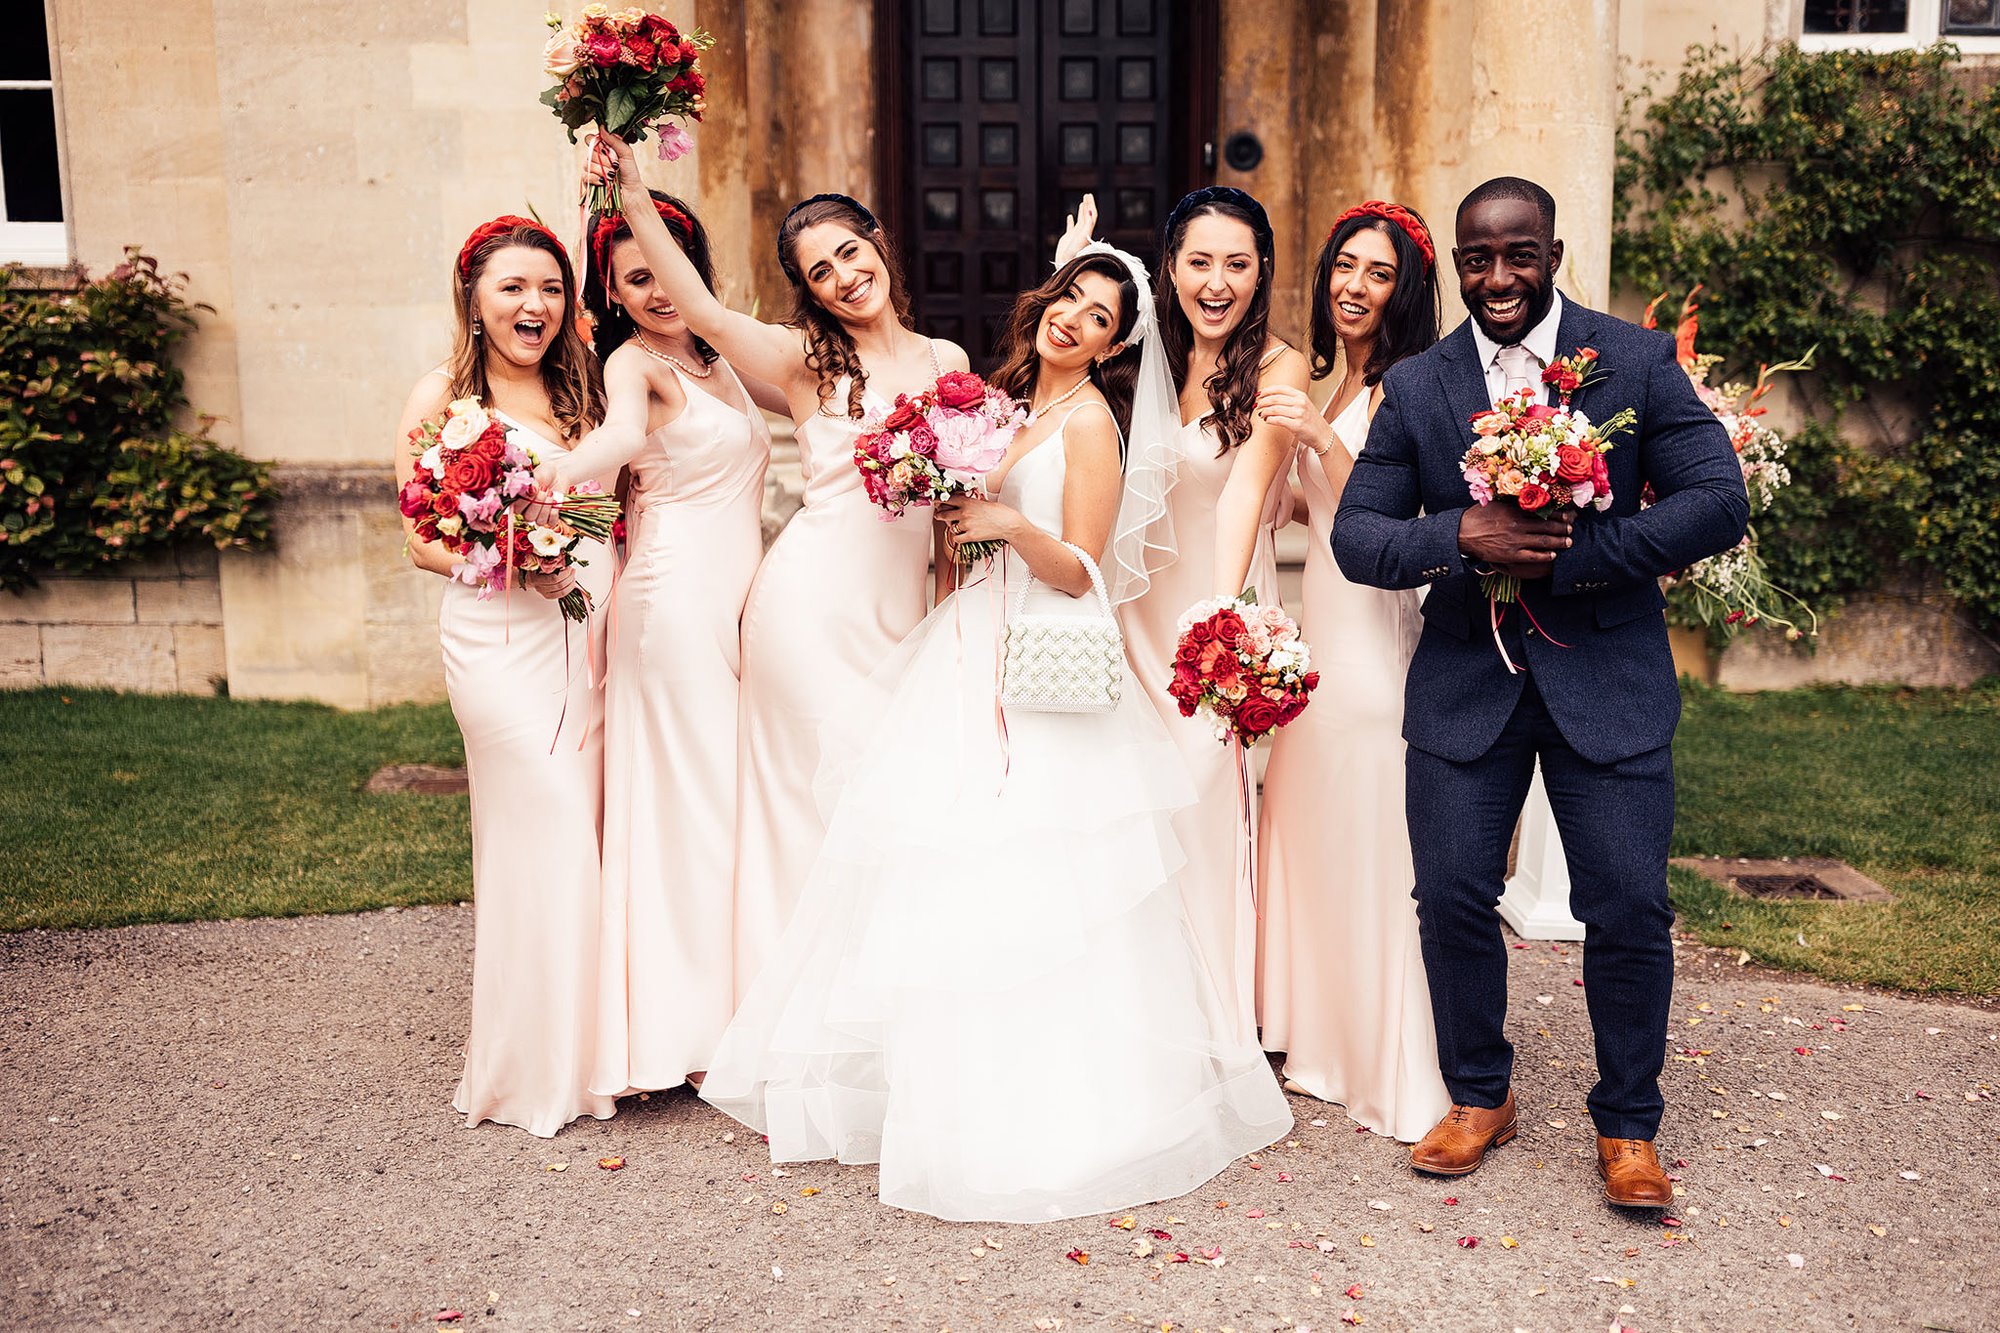 A bridal party with bouquets of red flowers posing with the groom outside a stately home in Elmore